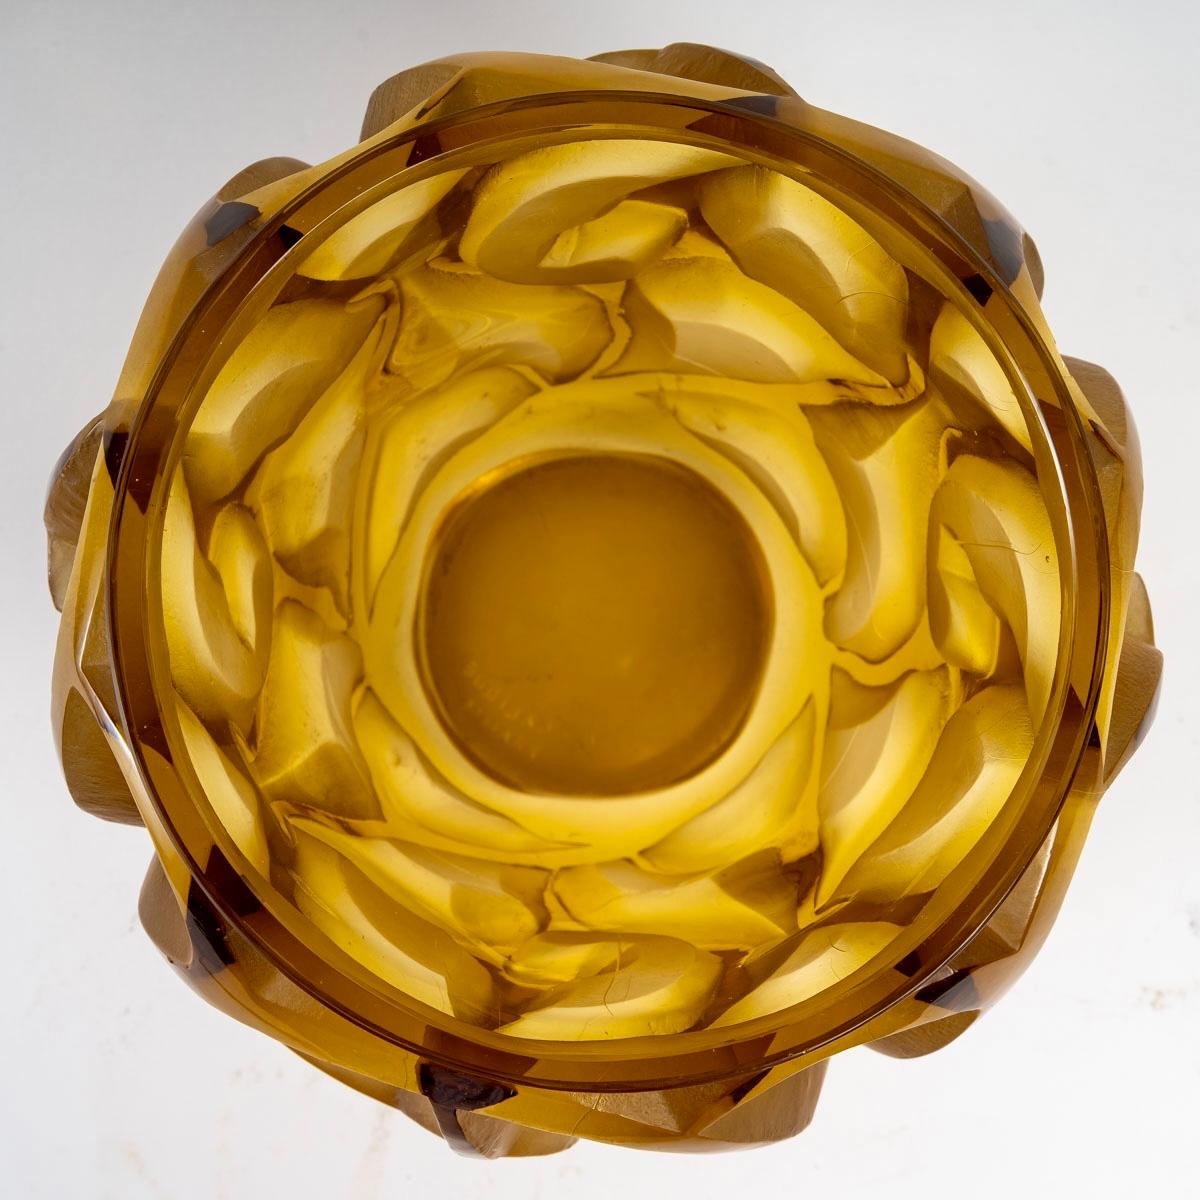 French 1926 René Lalique Tourbillons Vase in Yellow Amber Honey Glass, Suzanne Lalique